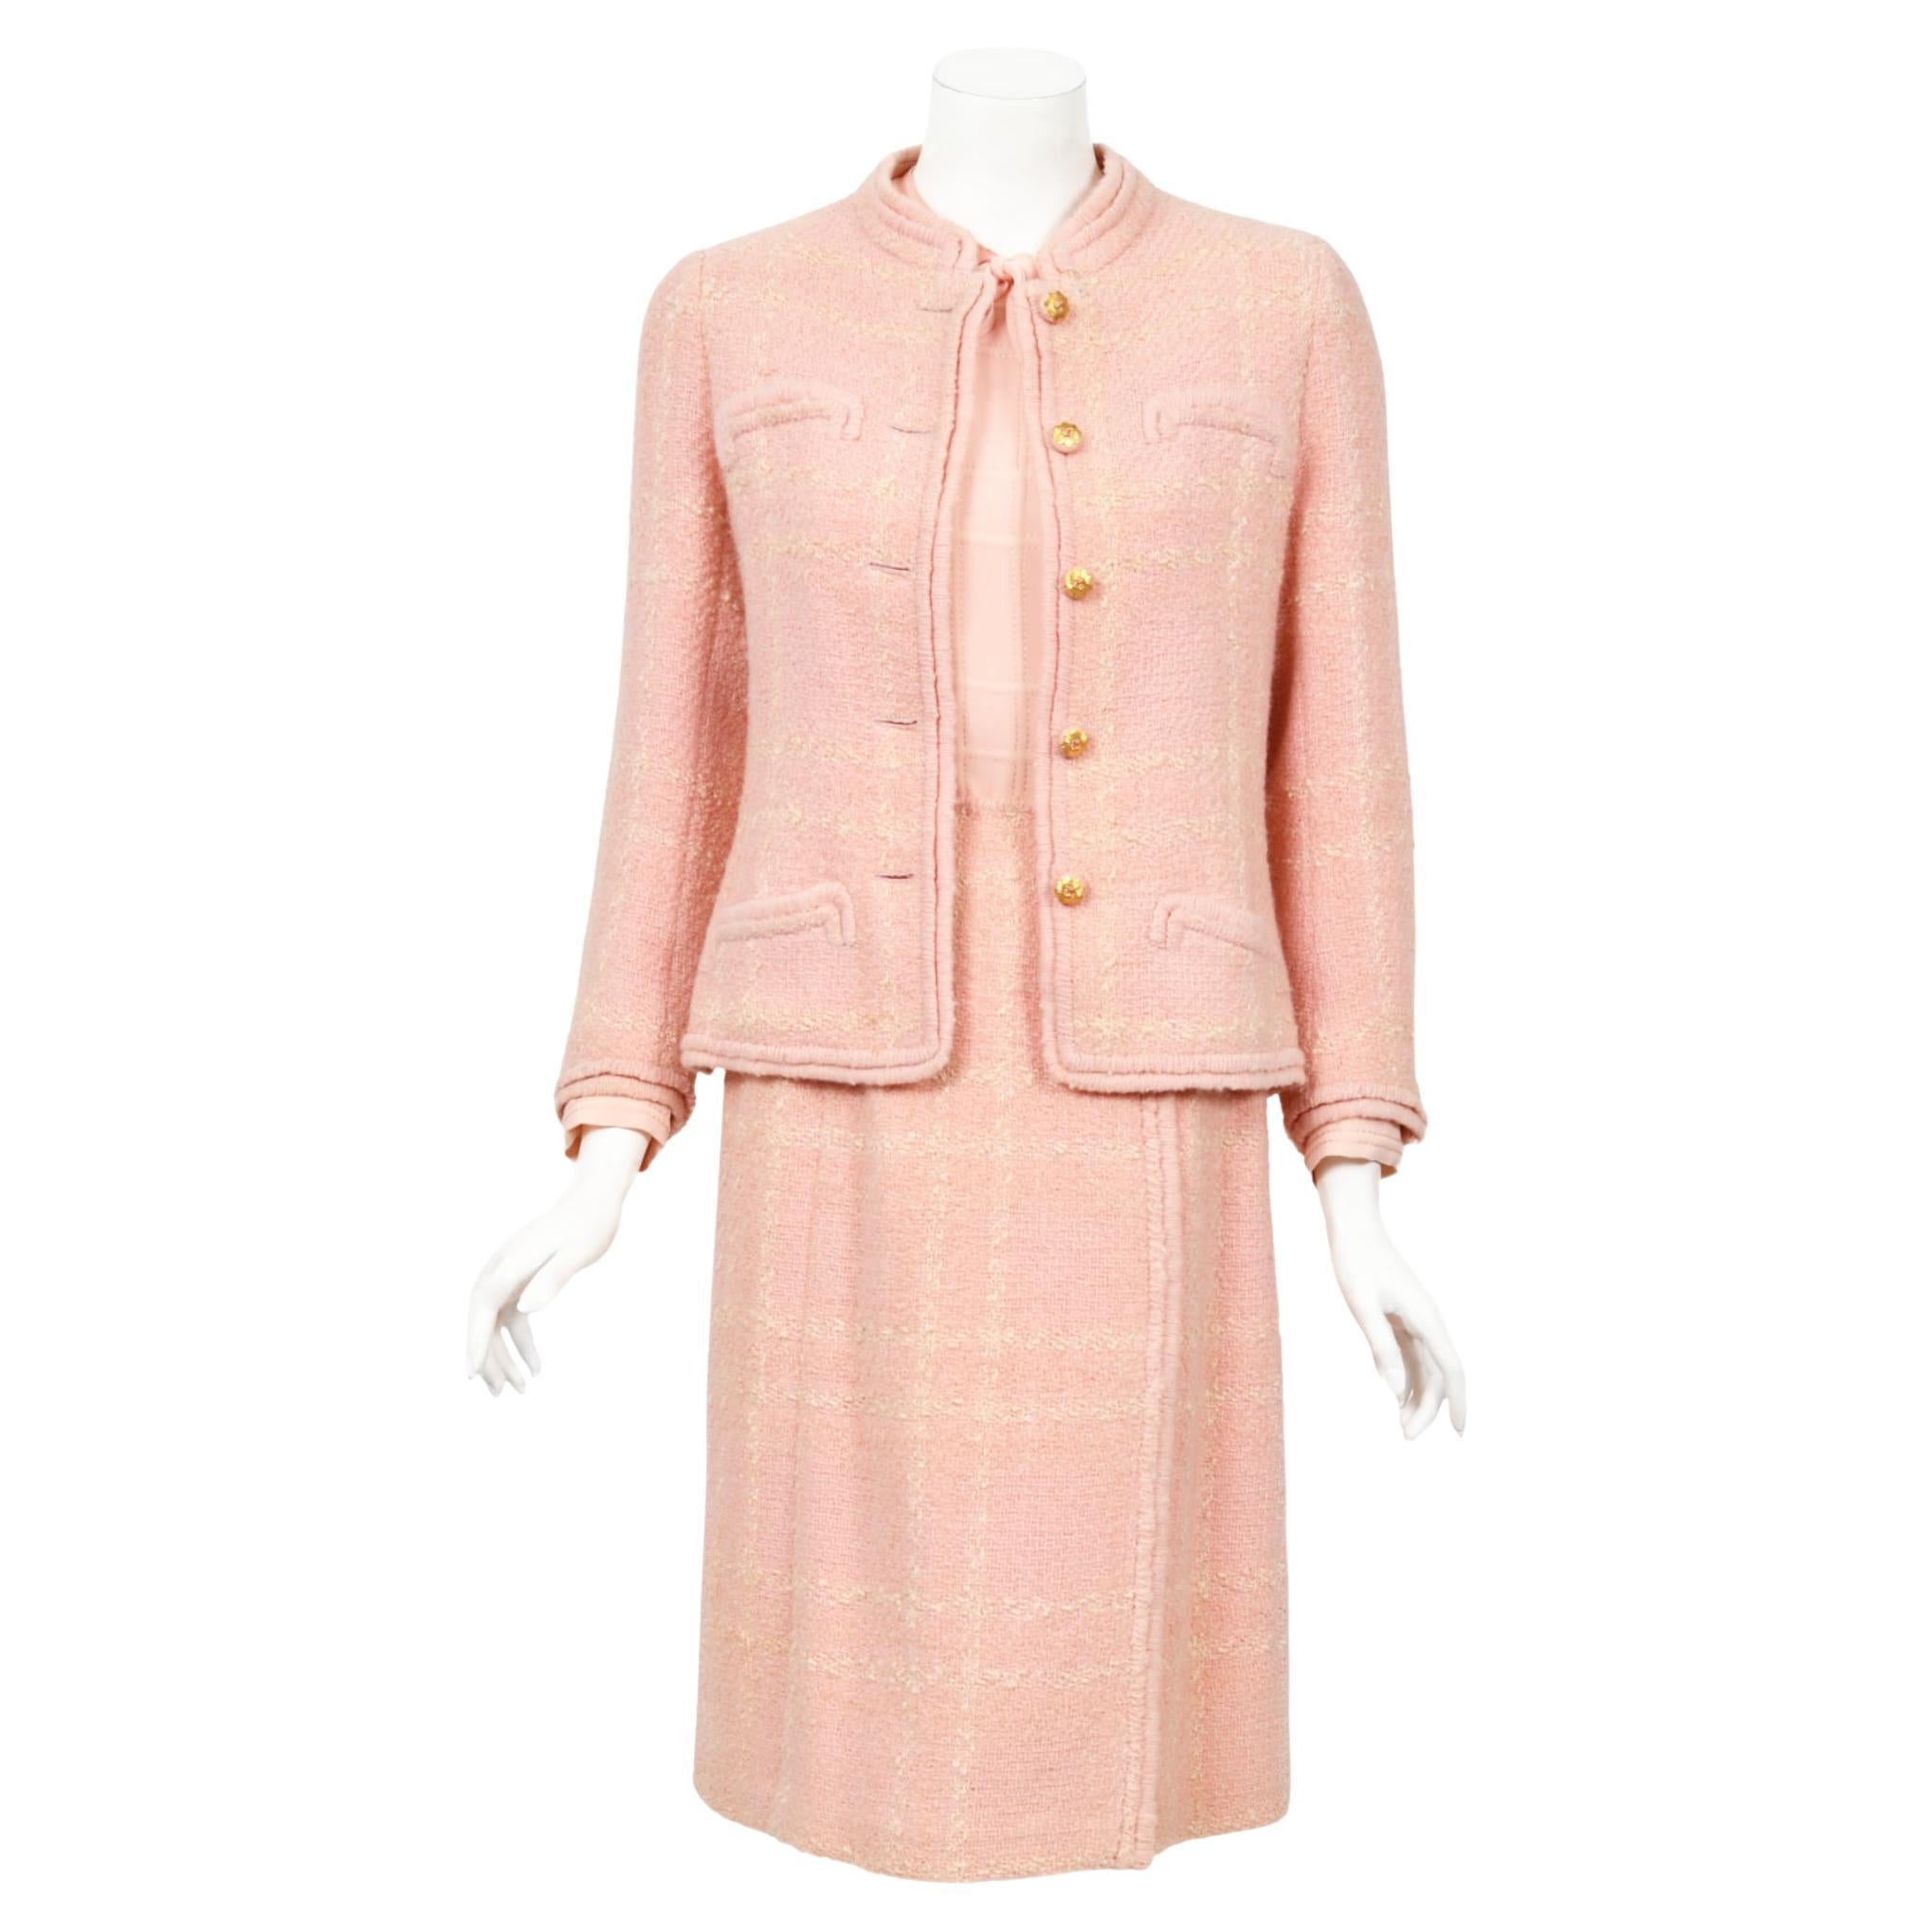 Vintage 1973 Chanel Haute Couture Documented Pink Wool Jacket Blouse ...